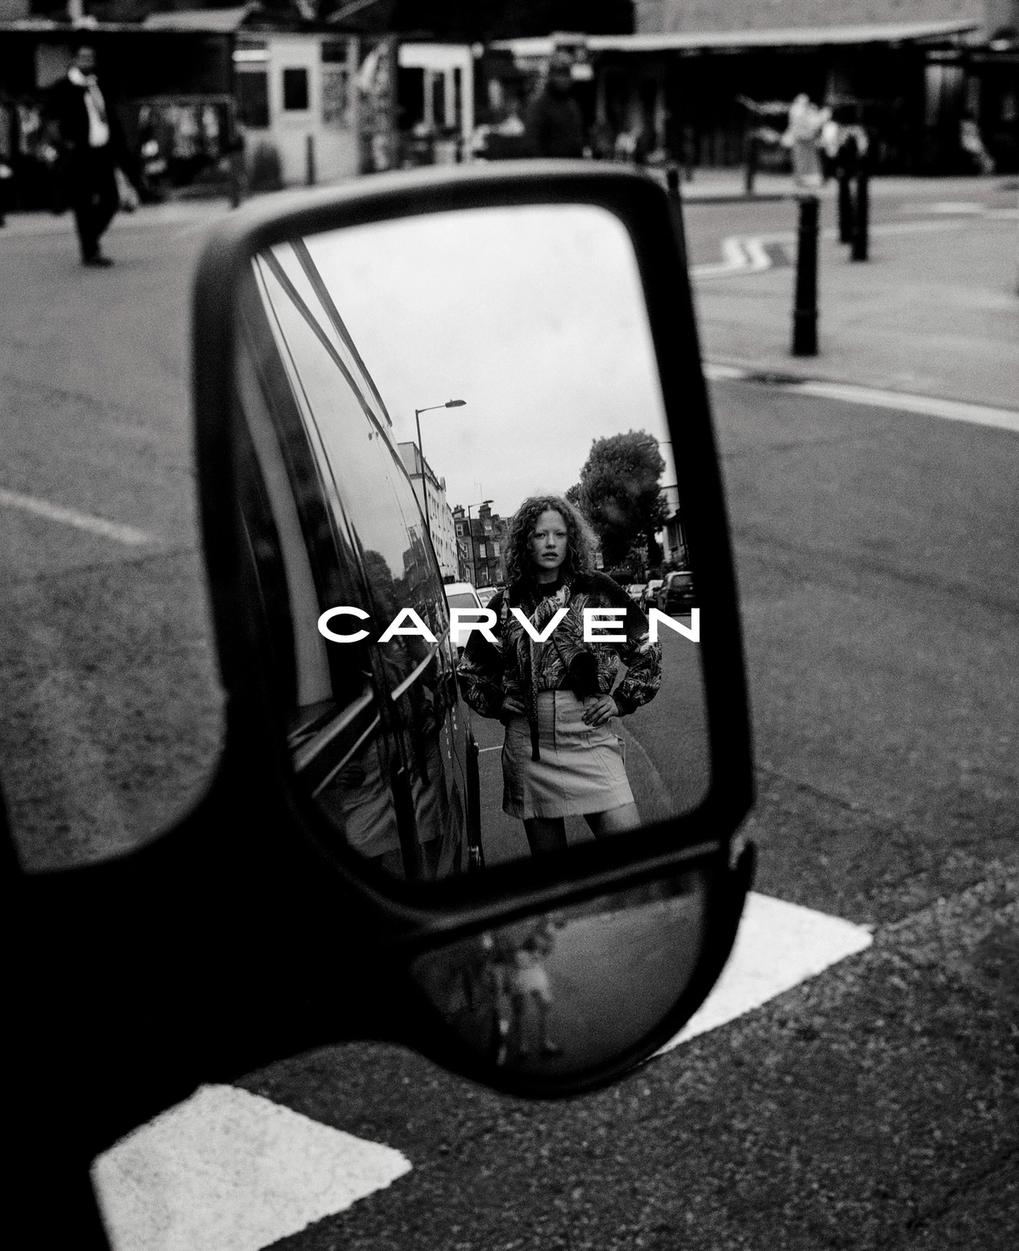 Carven by Bex Day